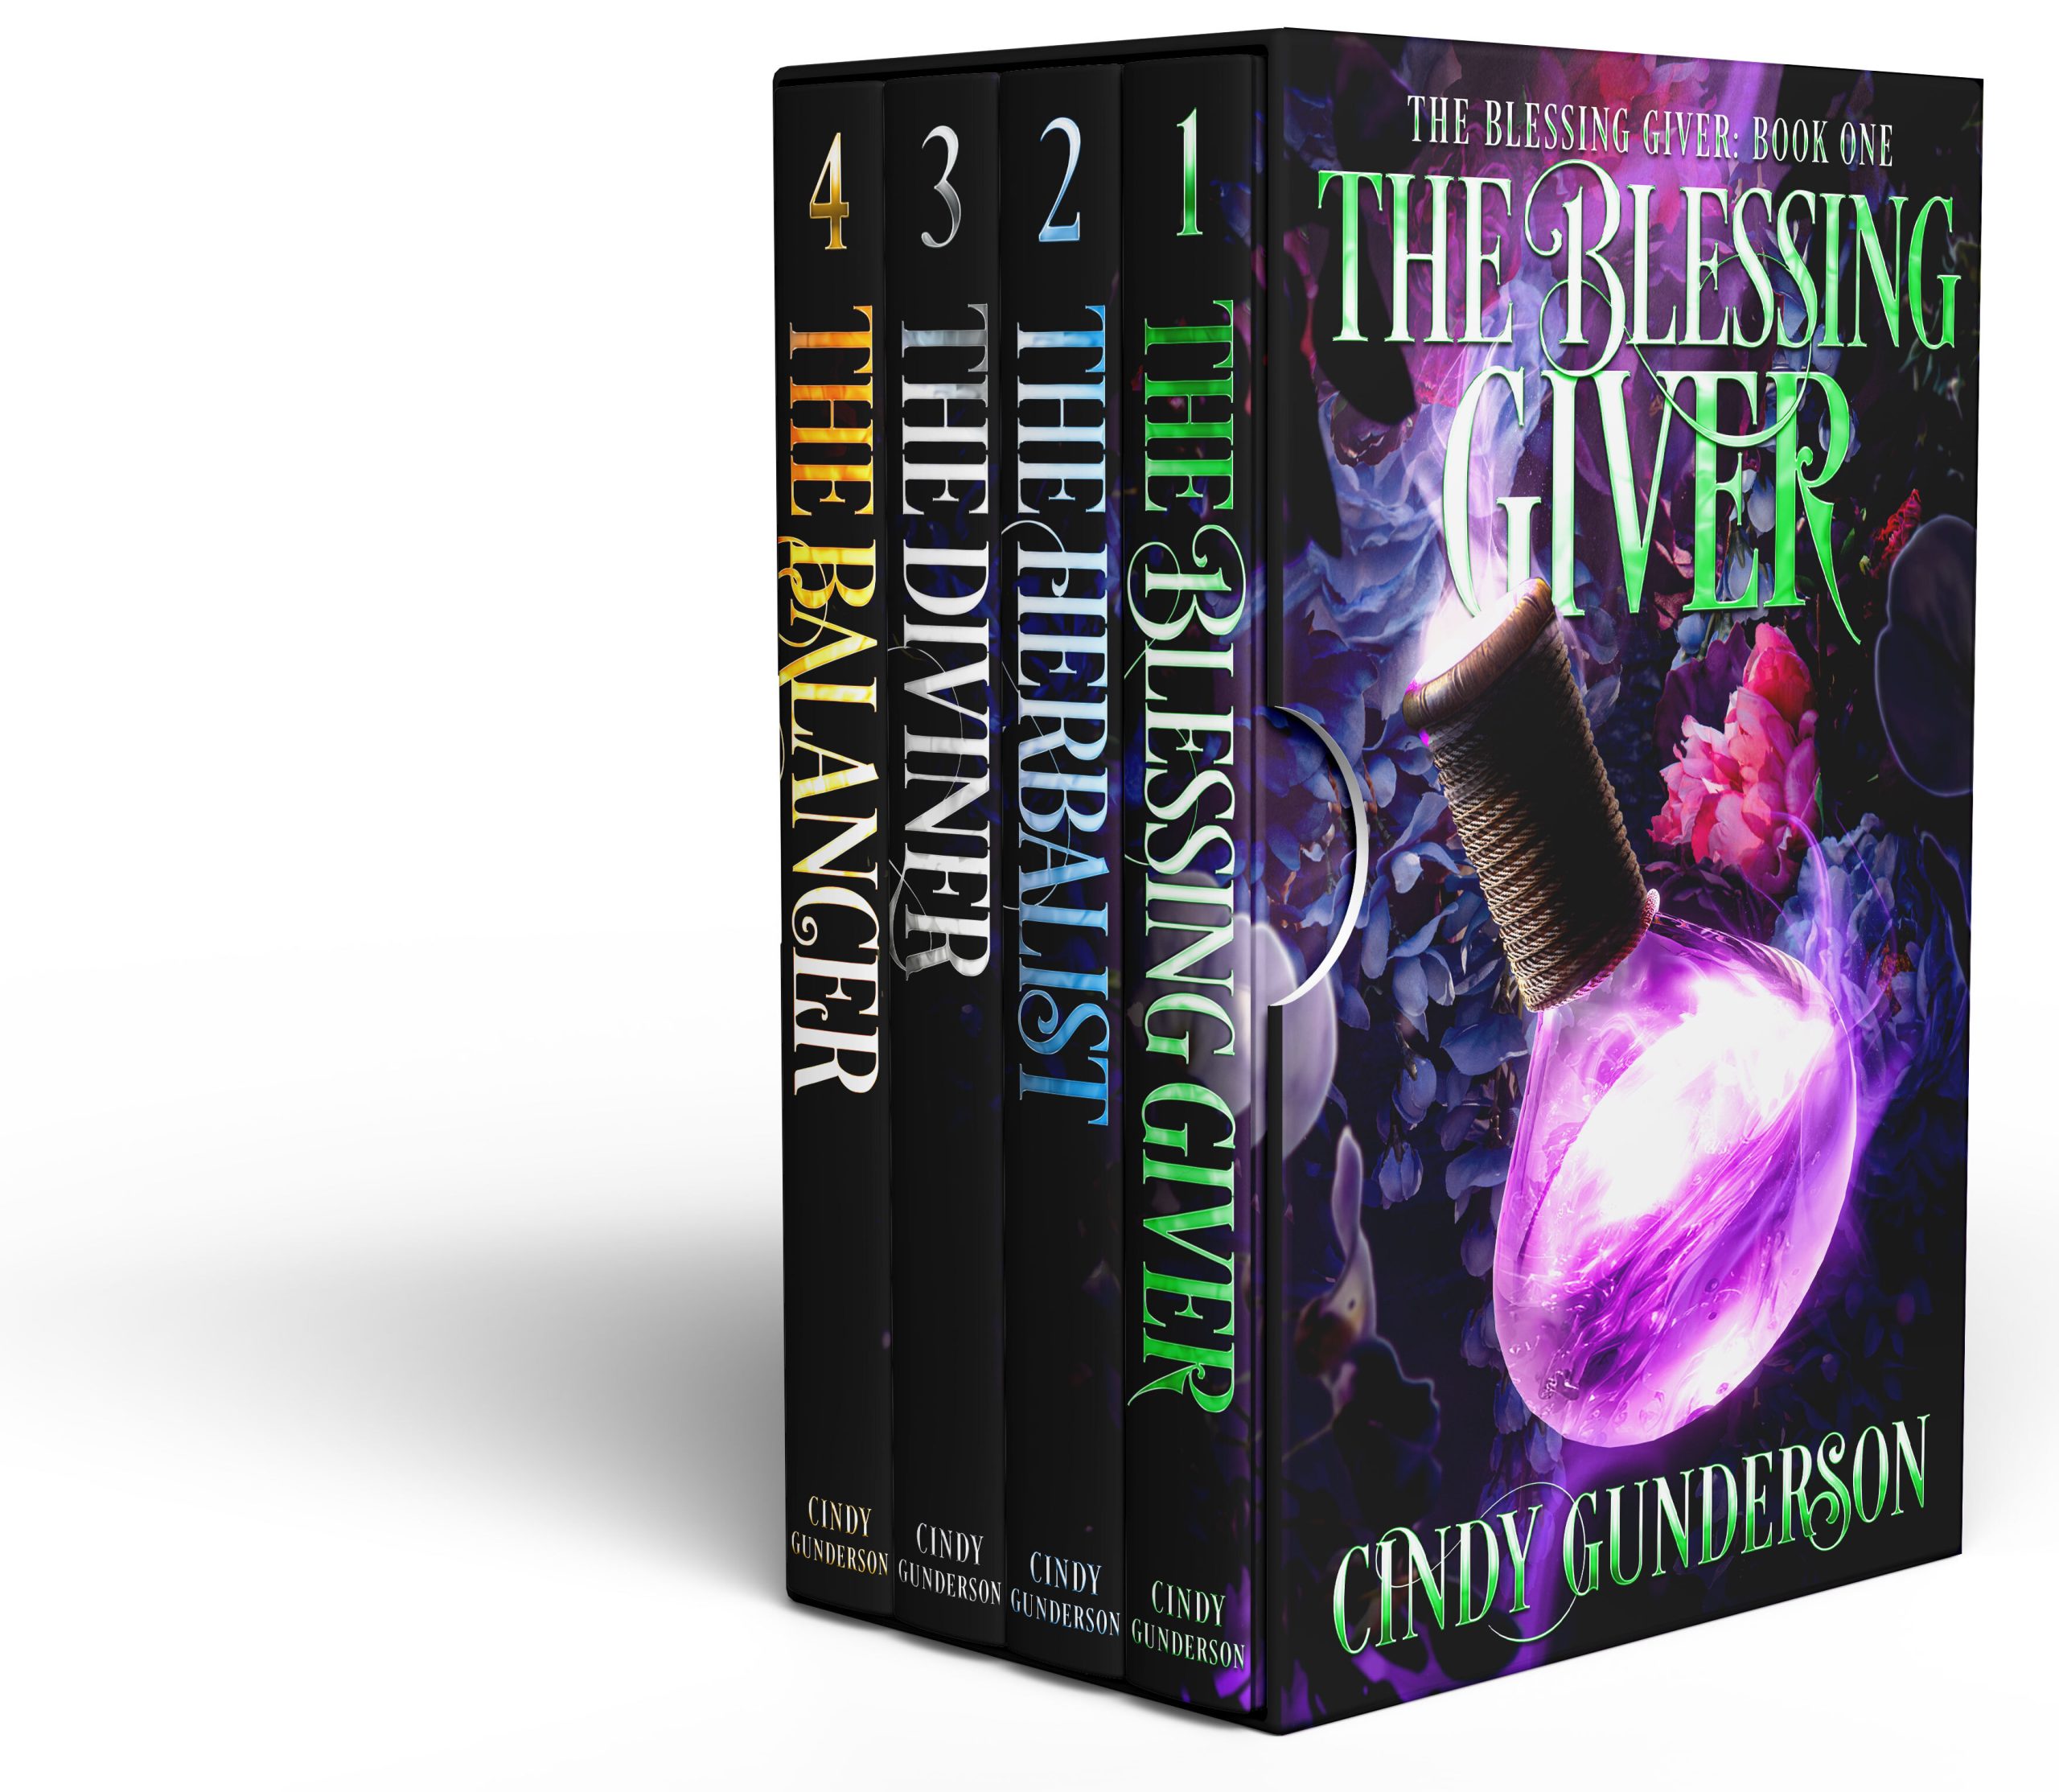 The Blessing Giver (Complete Series)